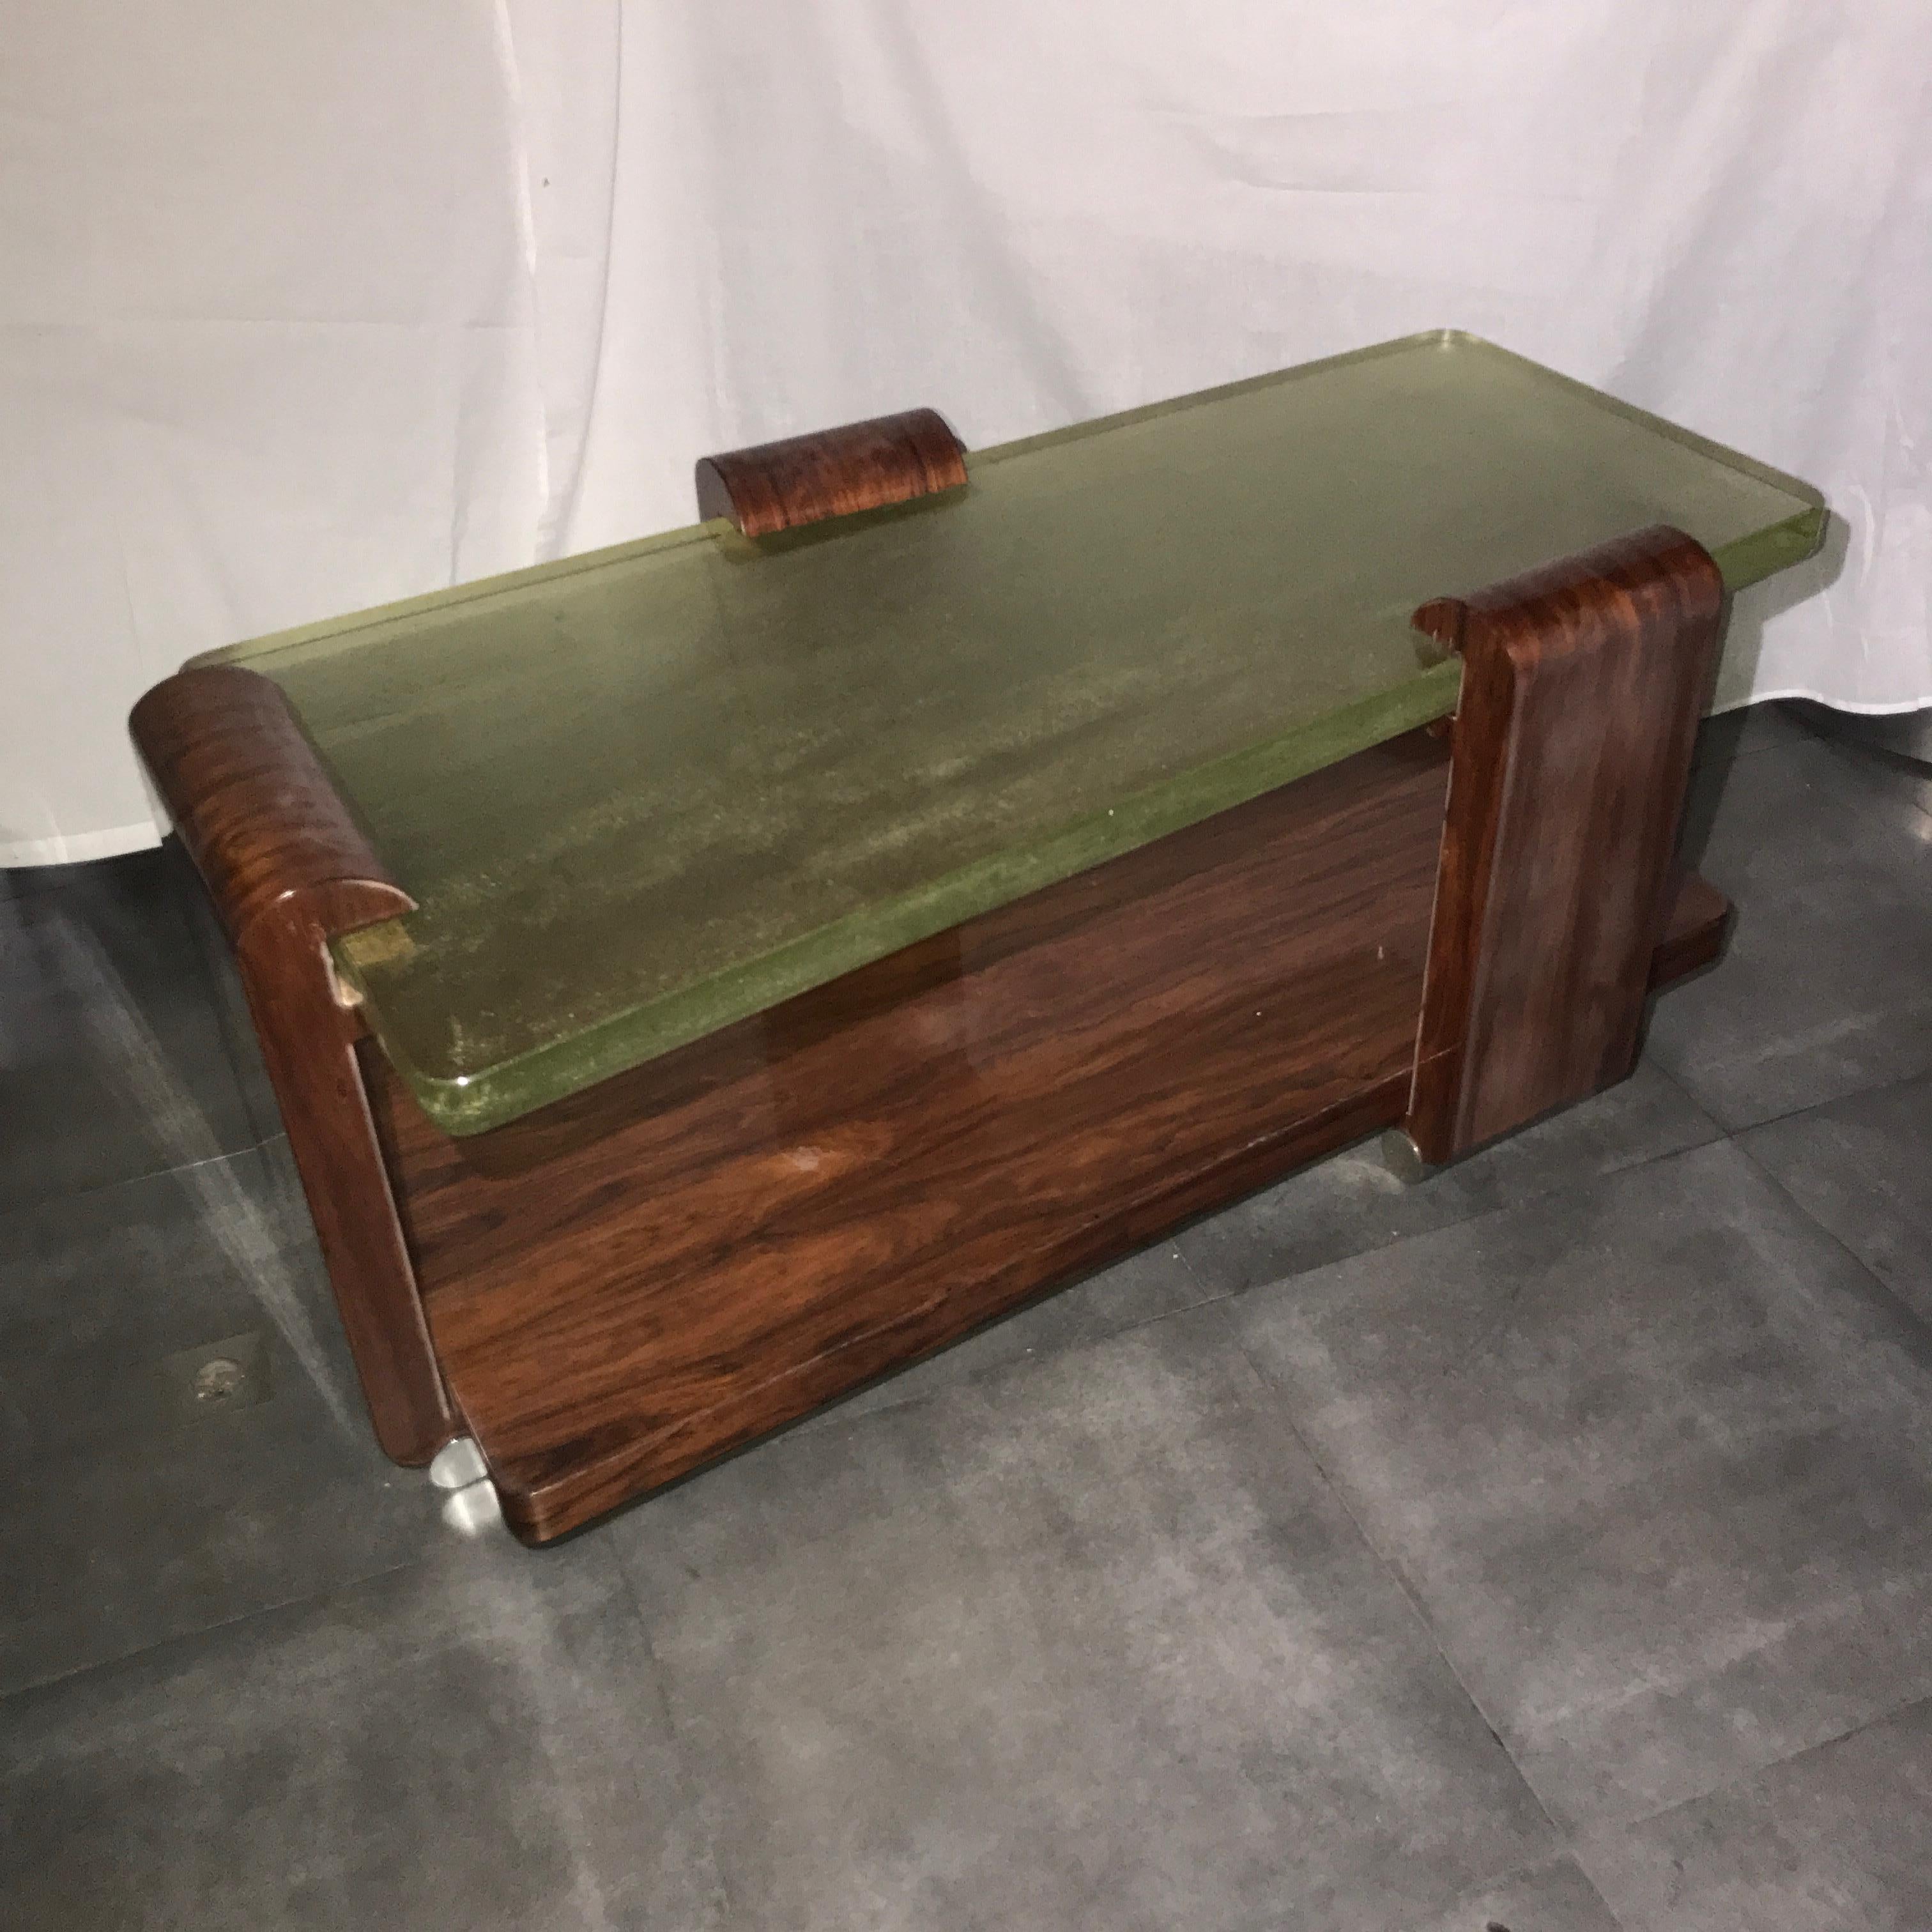 A rosewood low table with a Saint Gobain glass top designed by Maison Majorelle in France circa 1925. 
A modernist model of high quality, probably created for a private order. The glass slab has a trapezoidal shape and a thickness of 44 mm/1.57